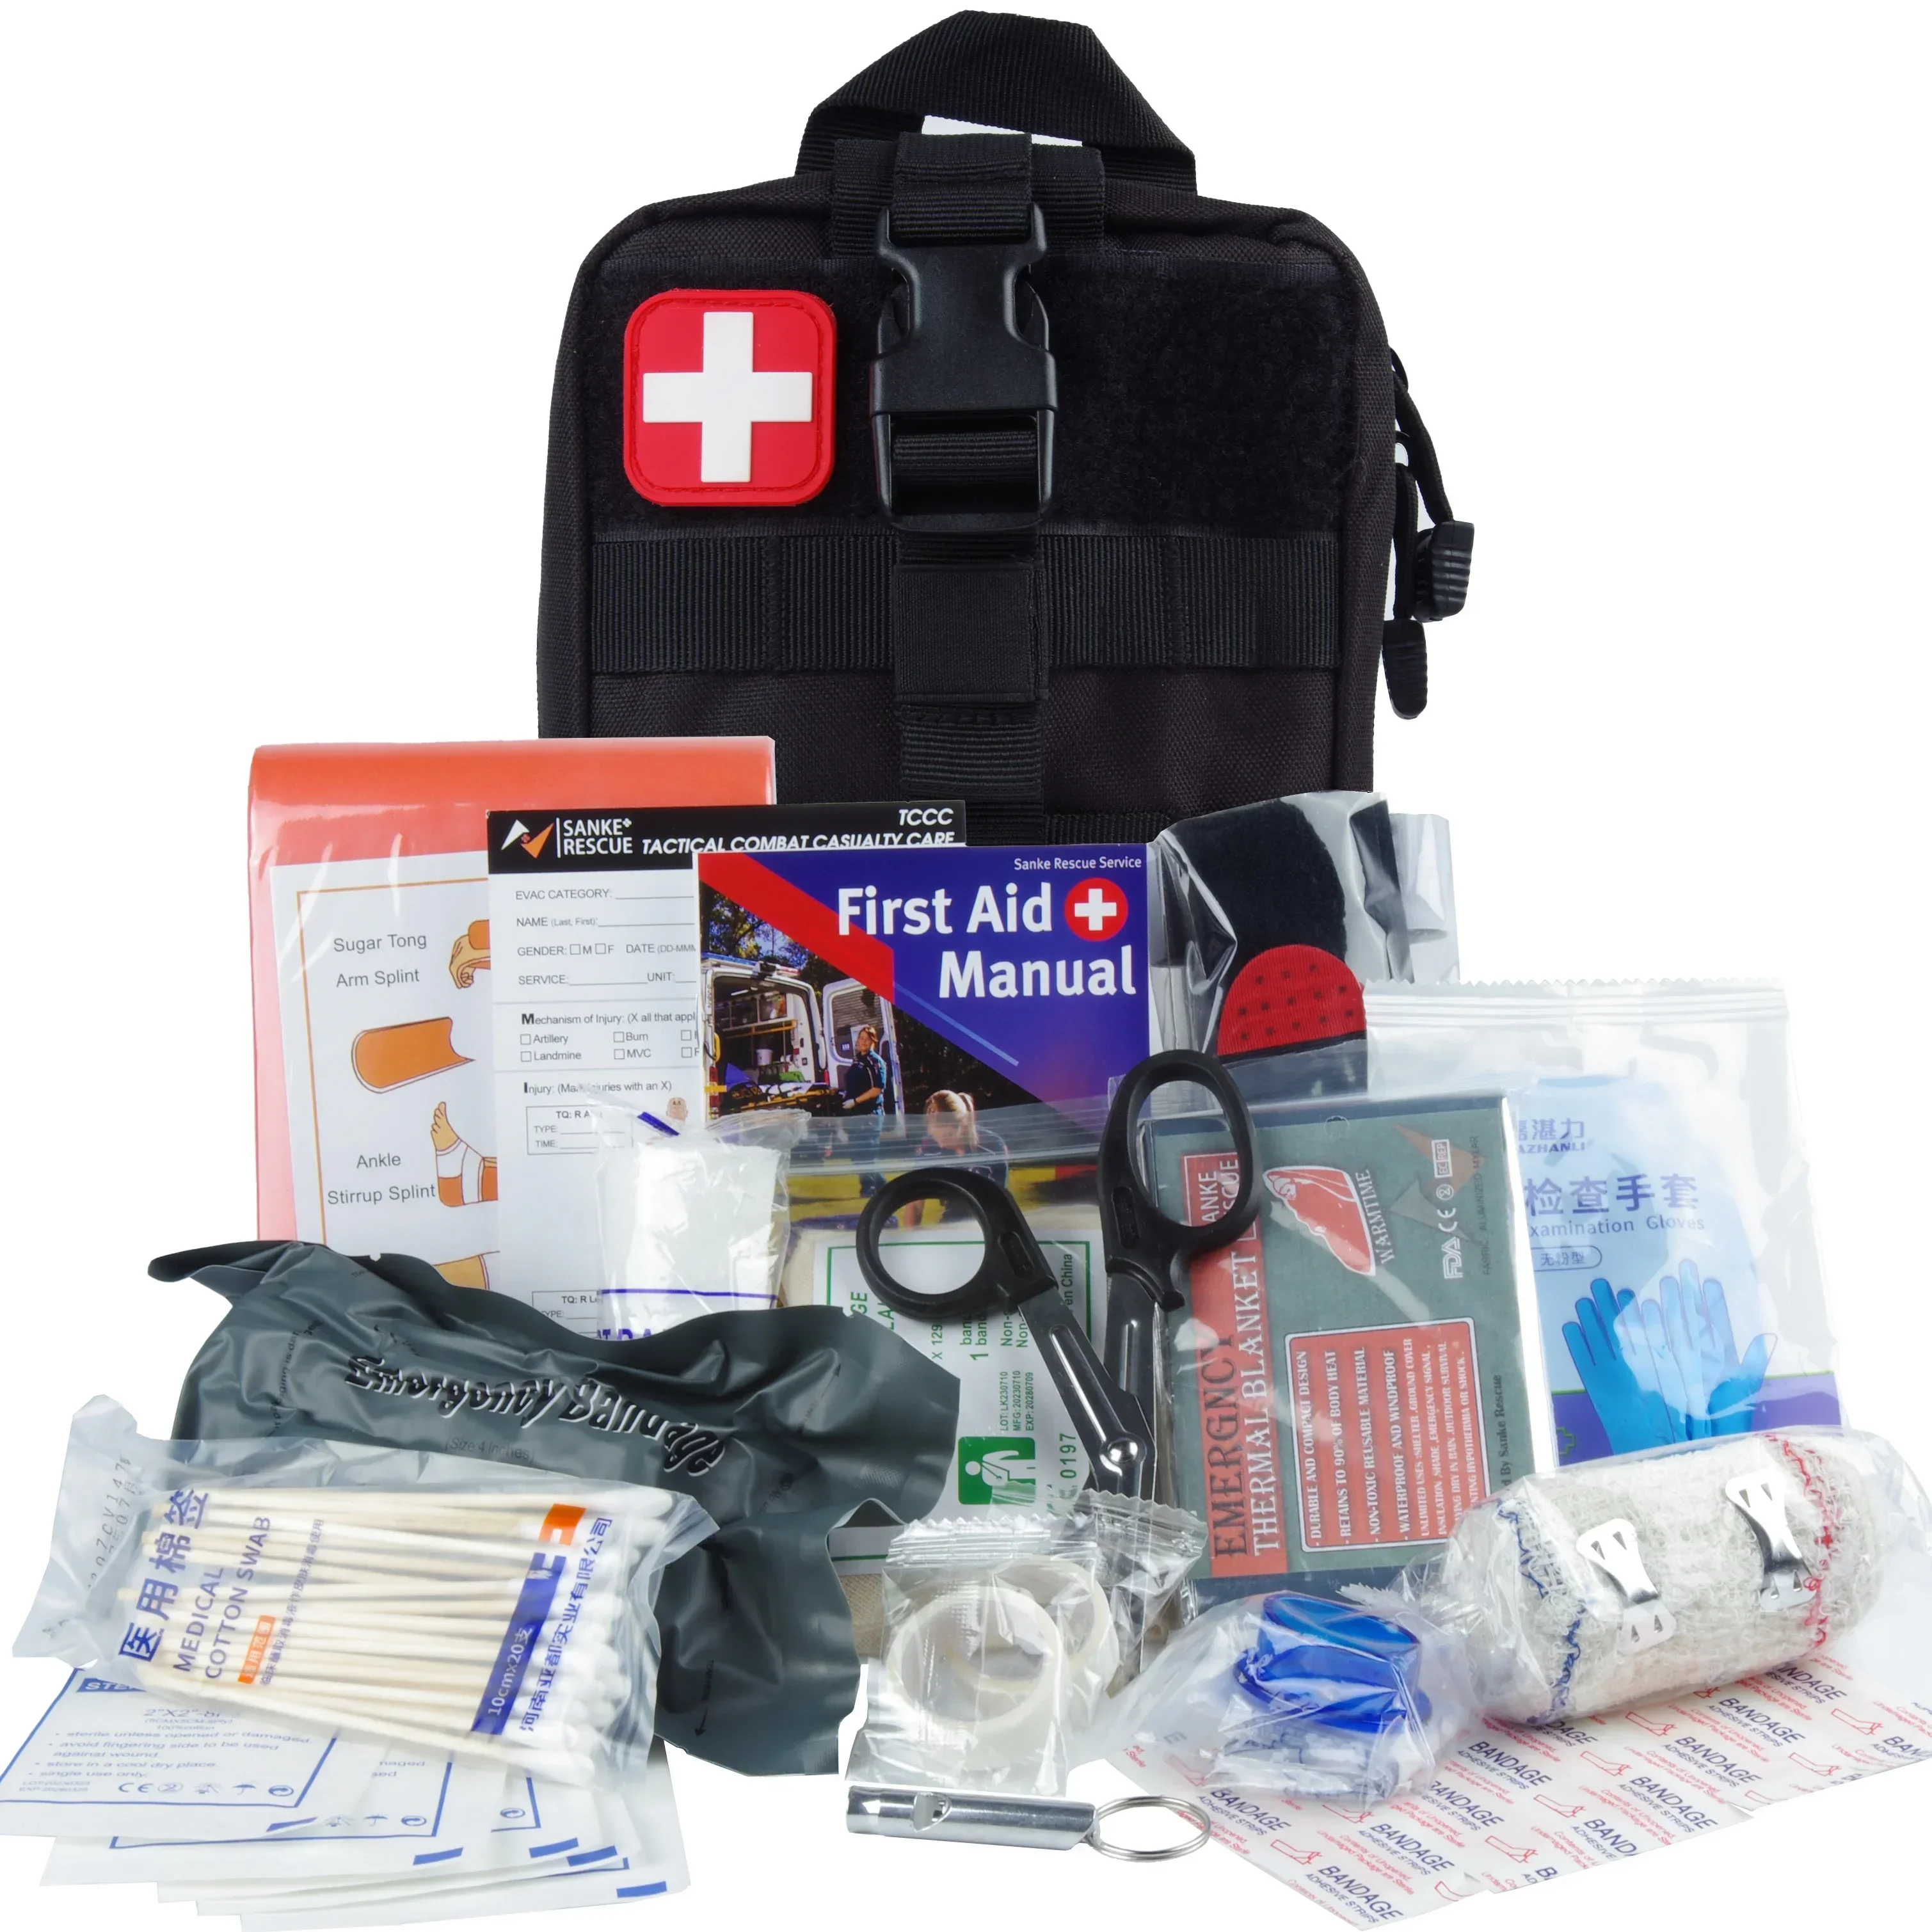 Survival First Aid Kit Survival Military Full Set Molle Outdoor Gear Emergency - £37.74 GBP